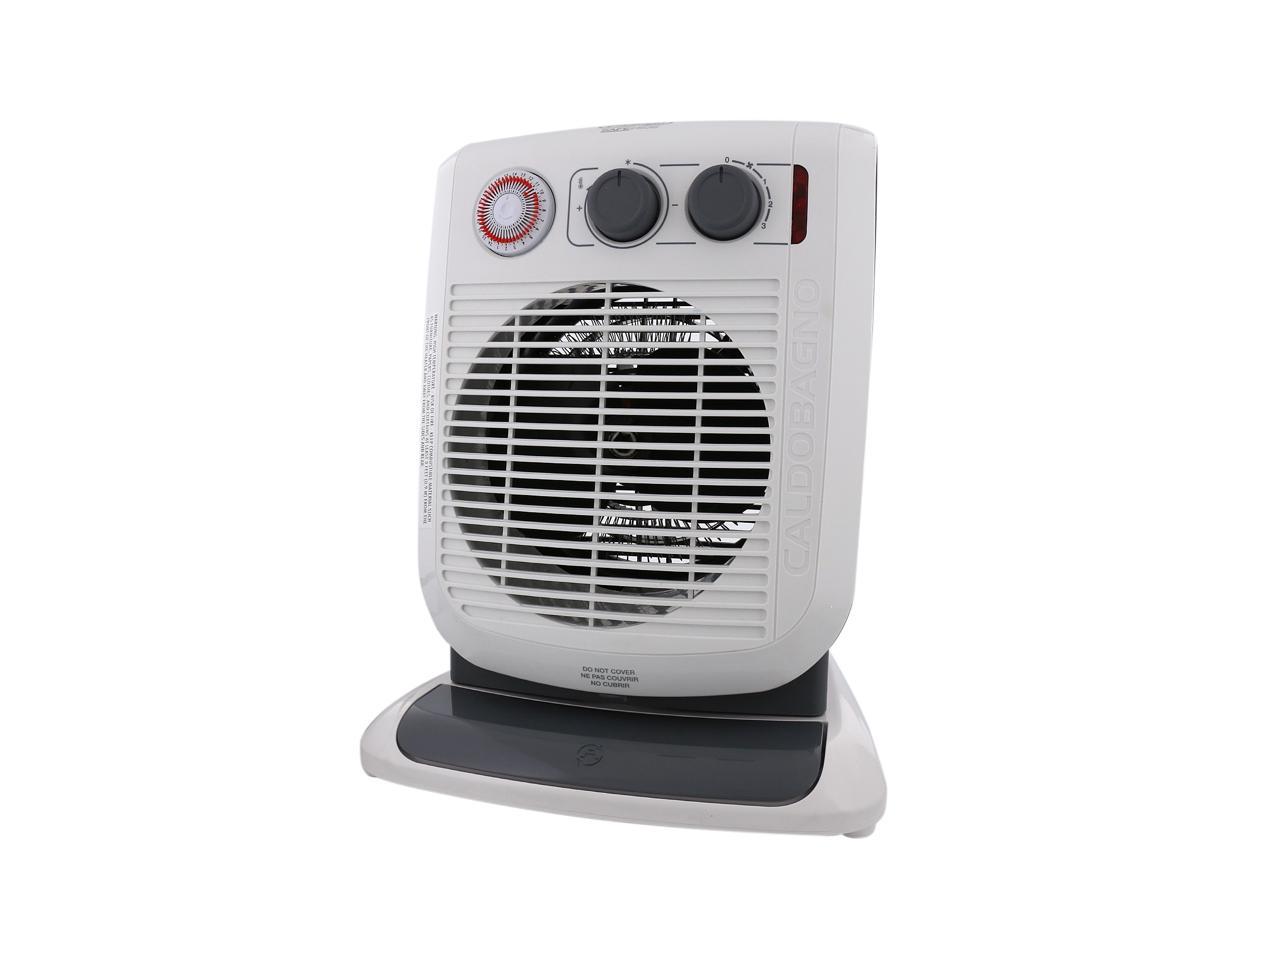 How To Use A De’Longhi Space Heater?